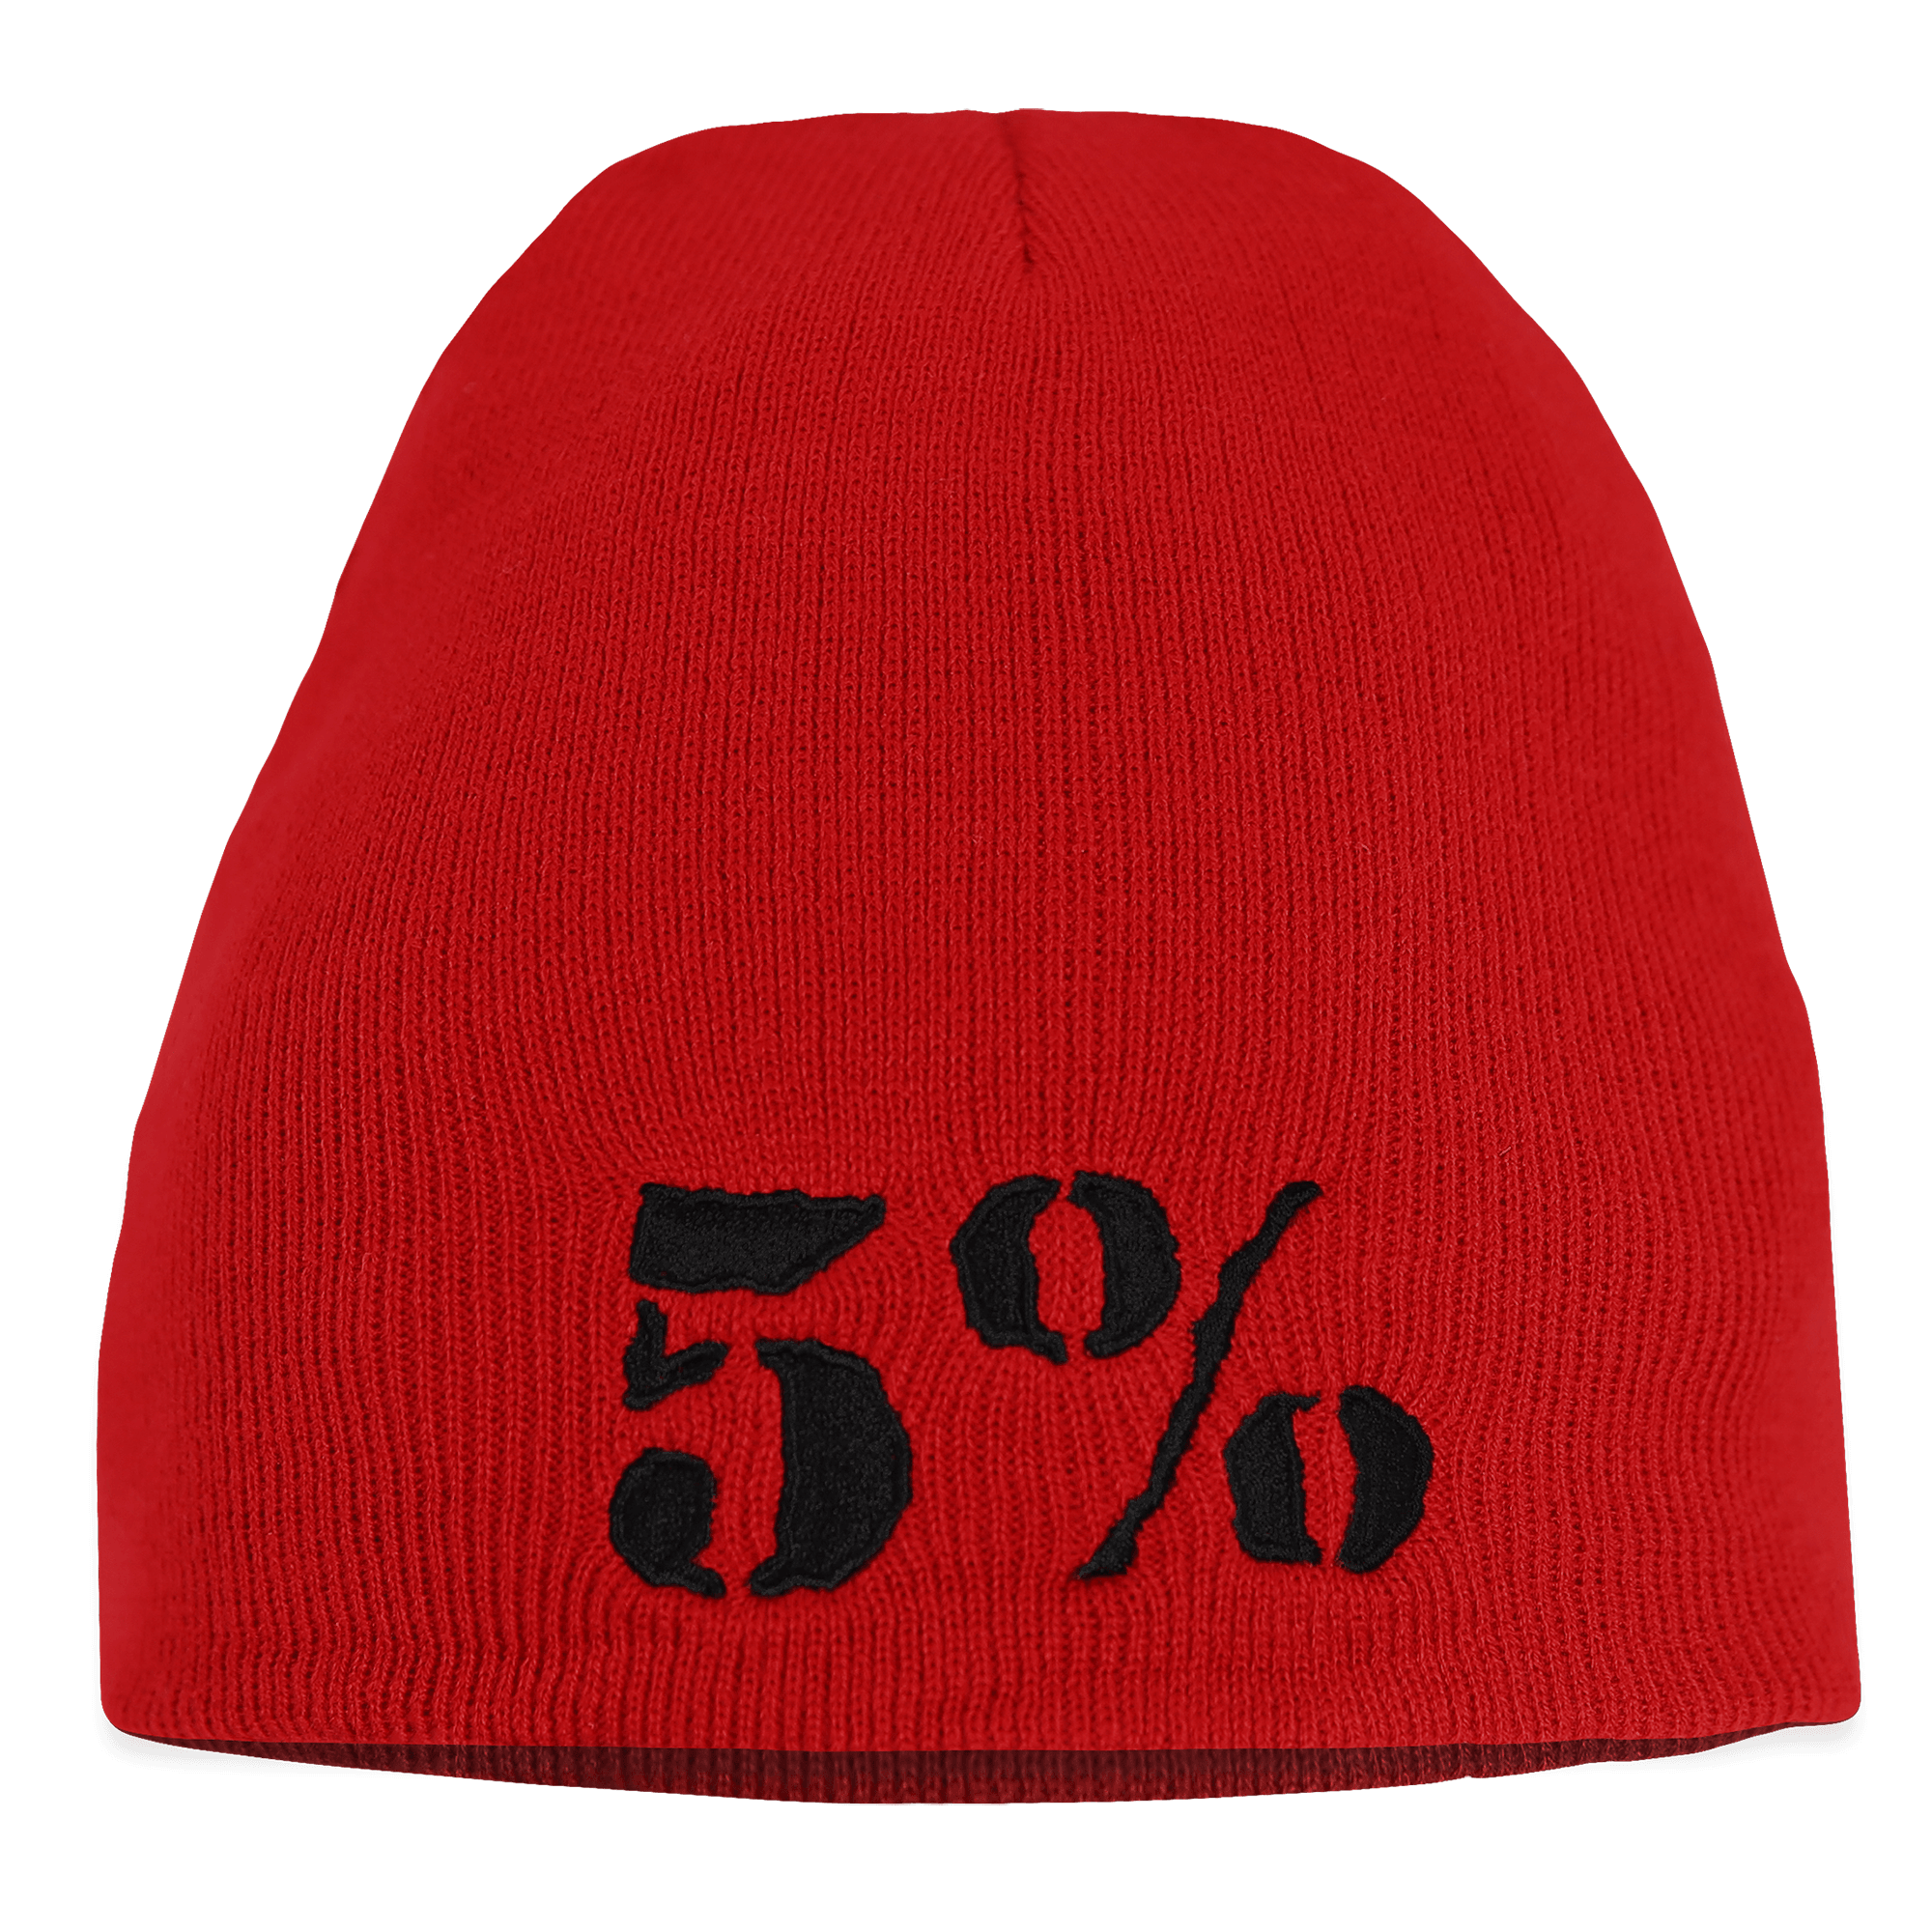 5% Red Beanie with Black Lettering - 5% Nutrition